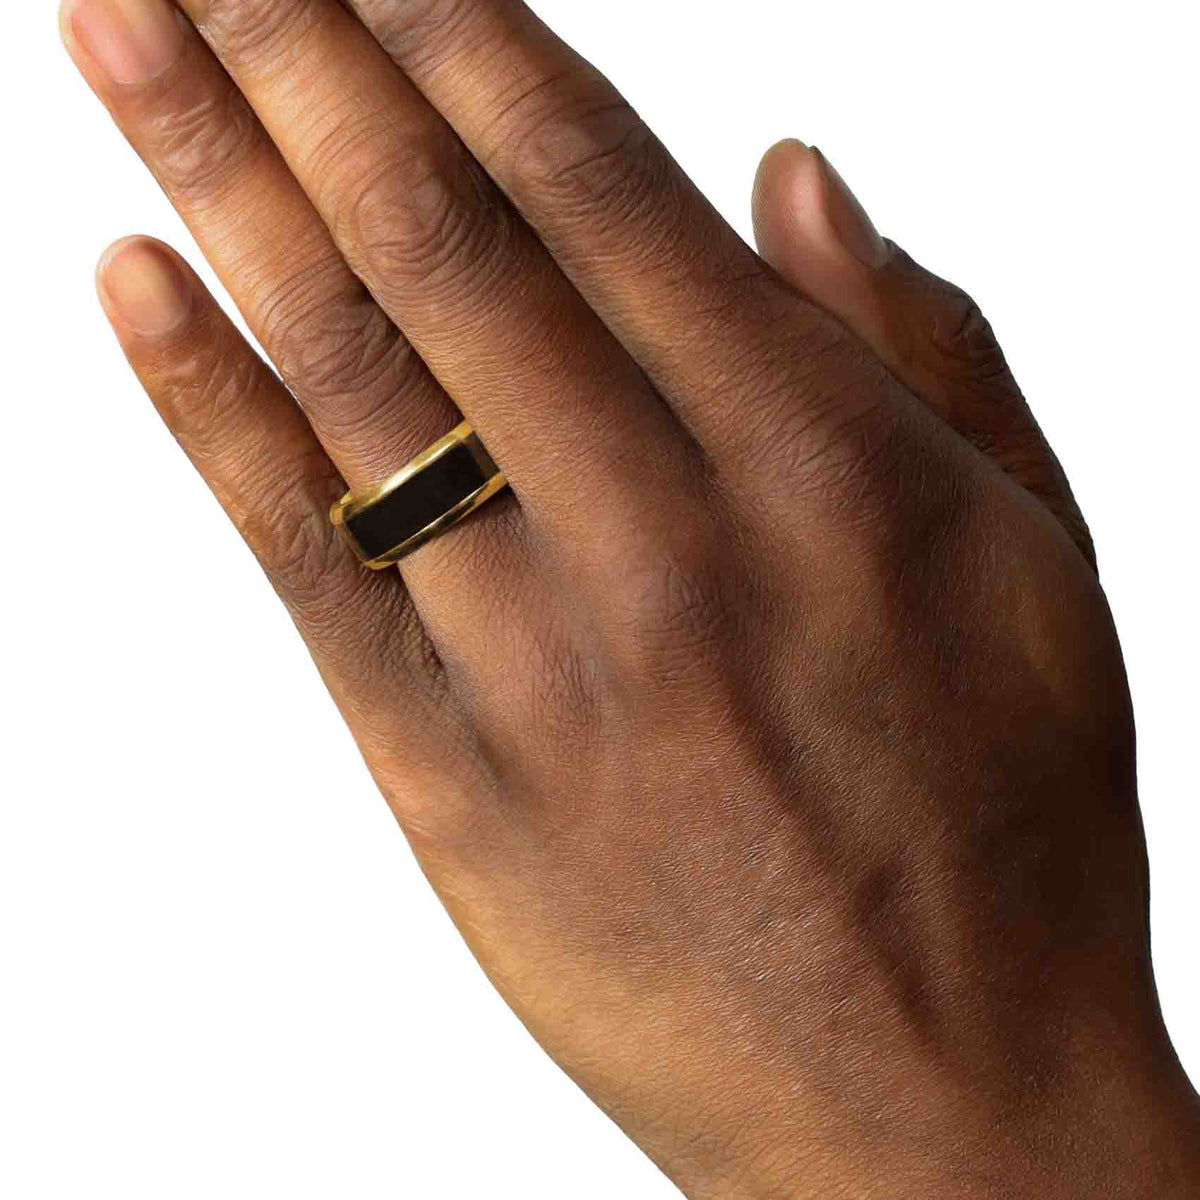 Elysium Lab Grown Diamond Band shown here with reverse inlay in 14K Yellow Gold